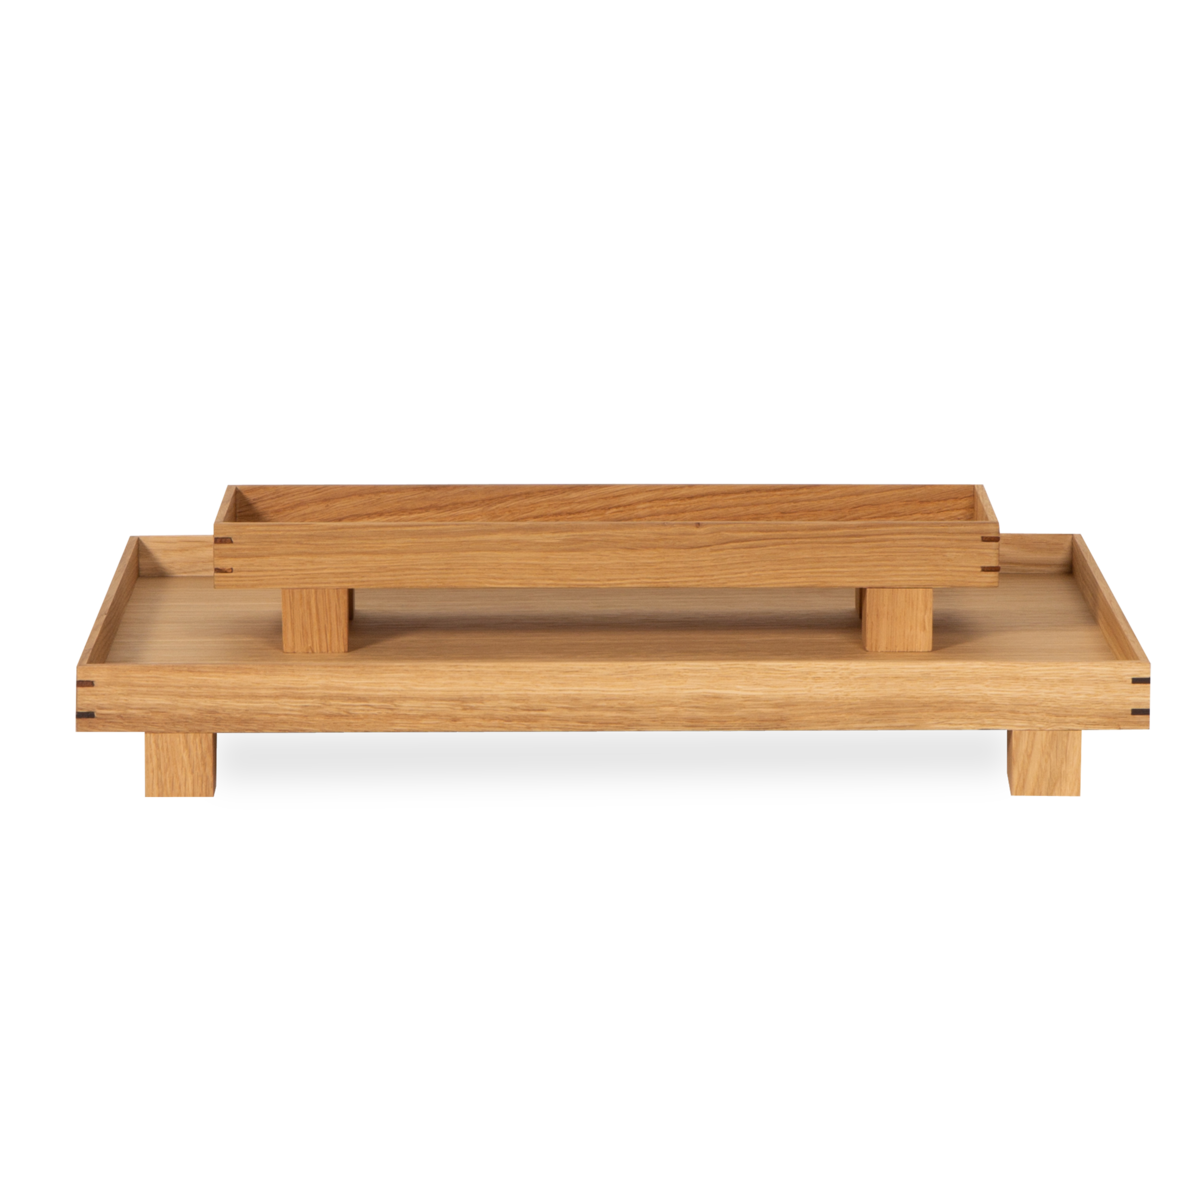 Drawing a clear line to Japanese aesthetic, the Bon series of wooden trays has a simple expression with a lightness from the four feet, lifting up the tray.